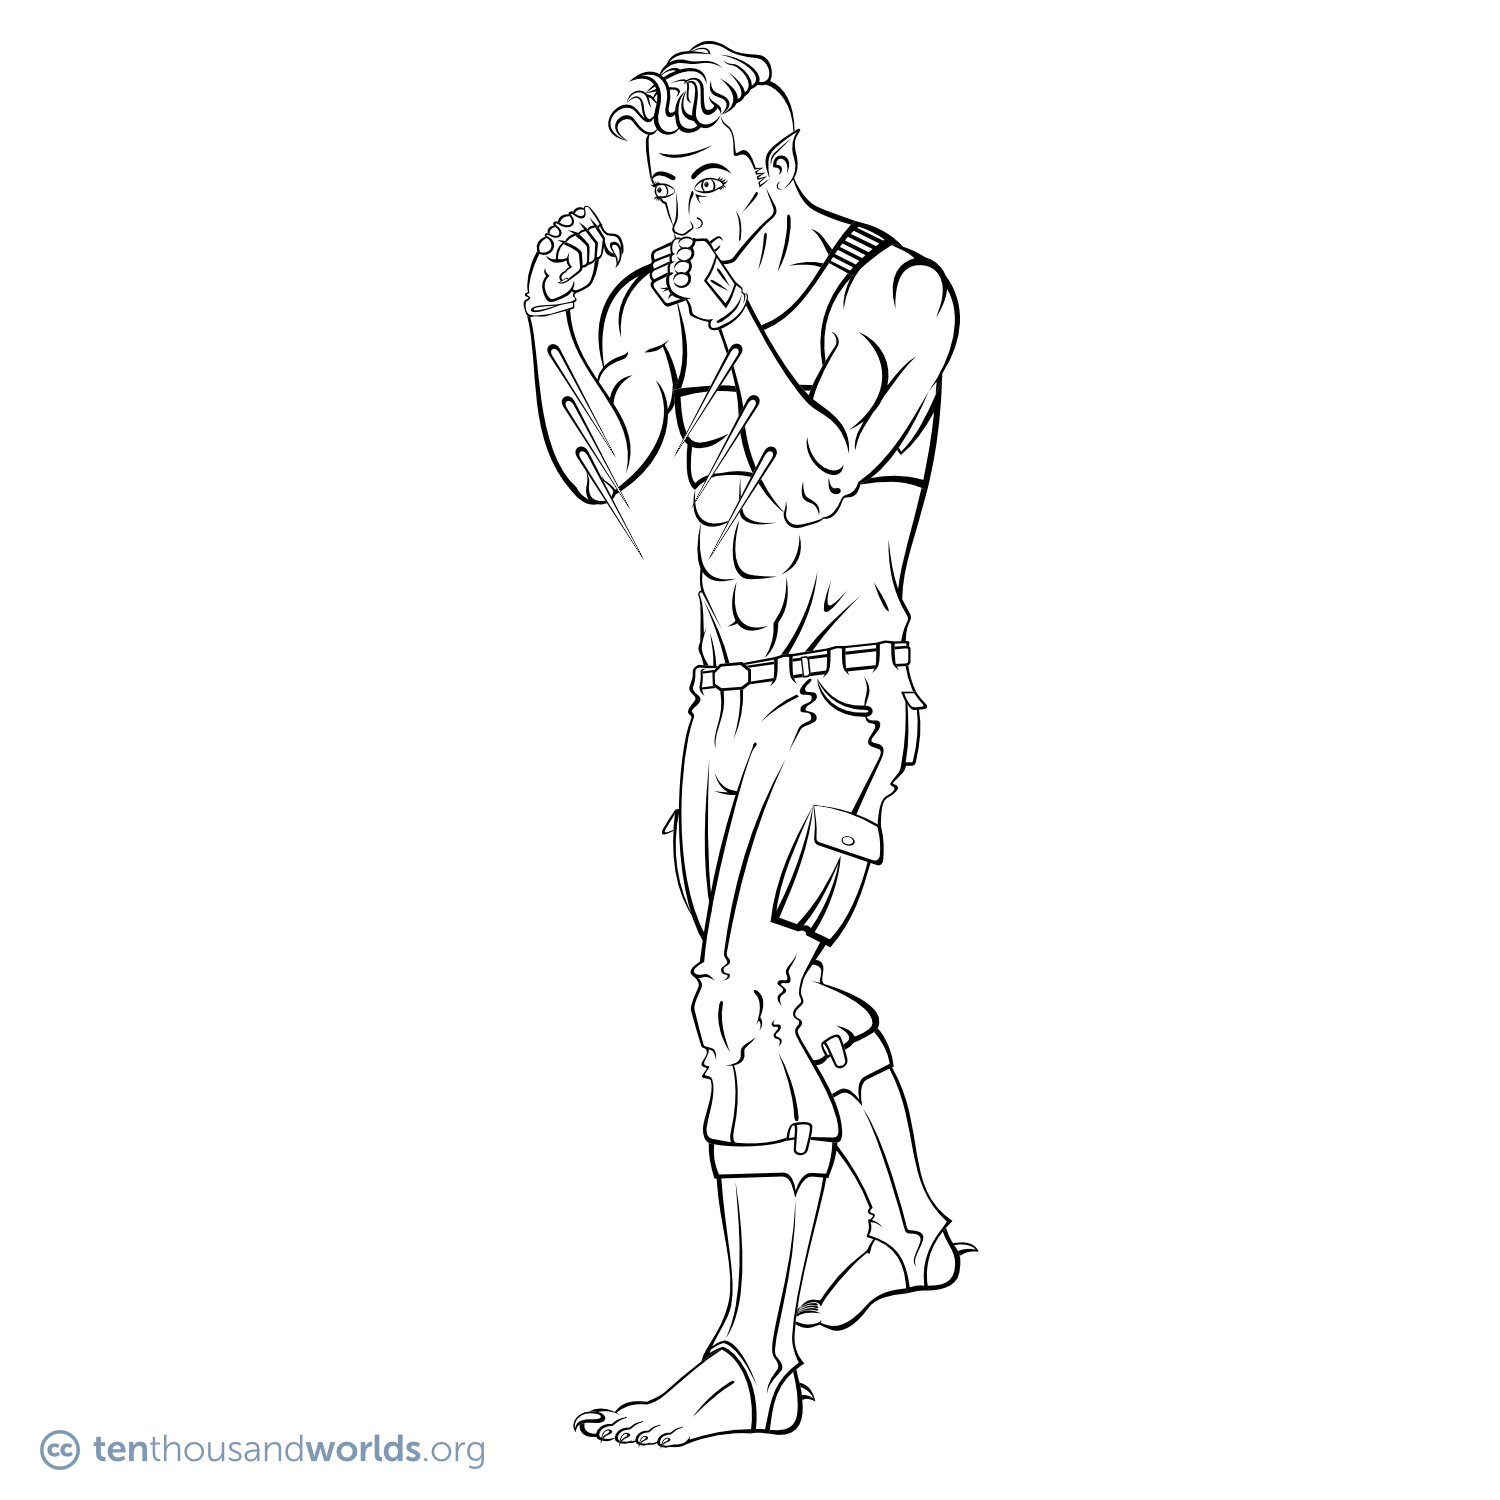 An ink outline of a mostly-human man in a boxer’s stance, with pointed ears, claws, foot spurs, and long spines coming from his forearms. He wears an athletic shirt and military-style trousers tucked into spats that leave exposed the natural weapons on his feet.